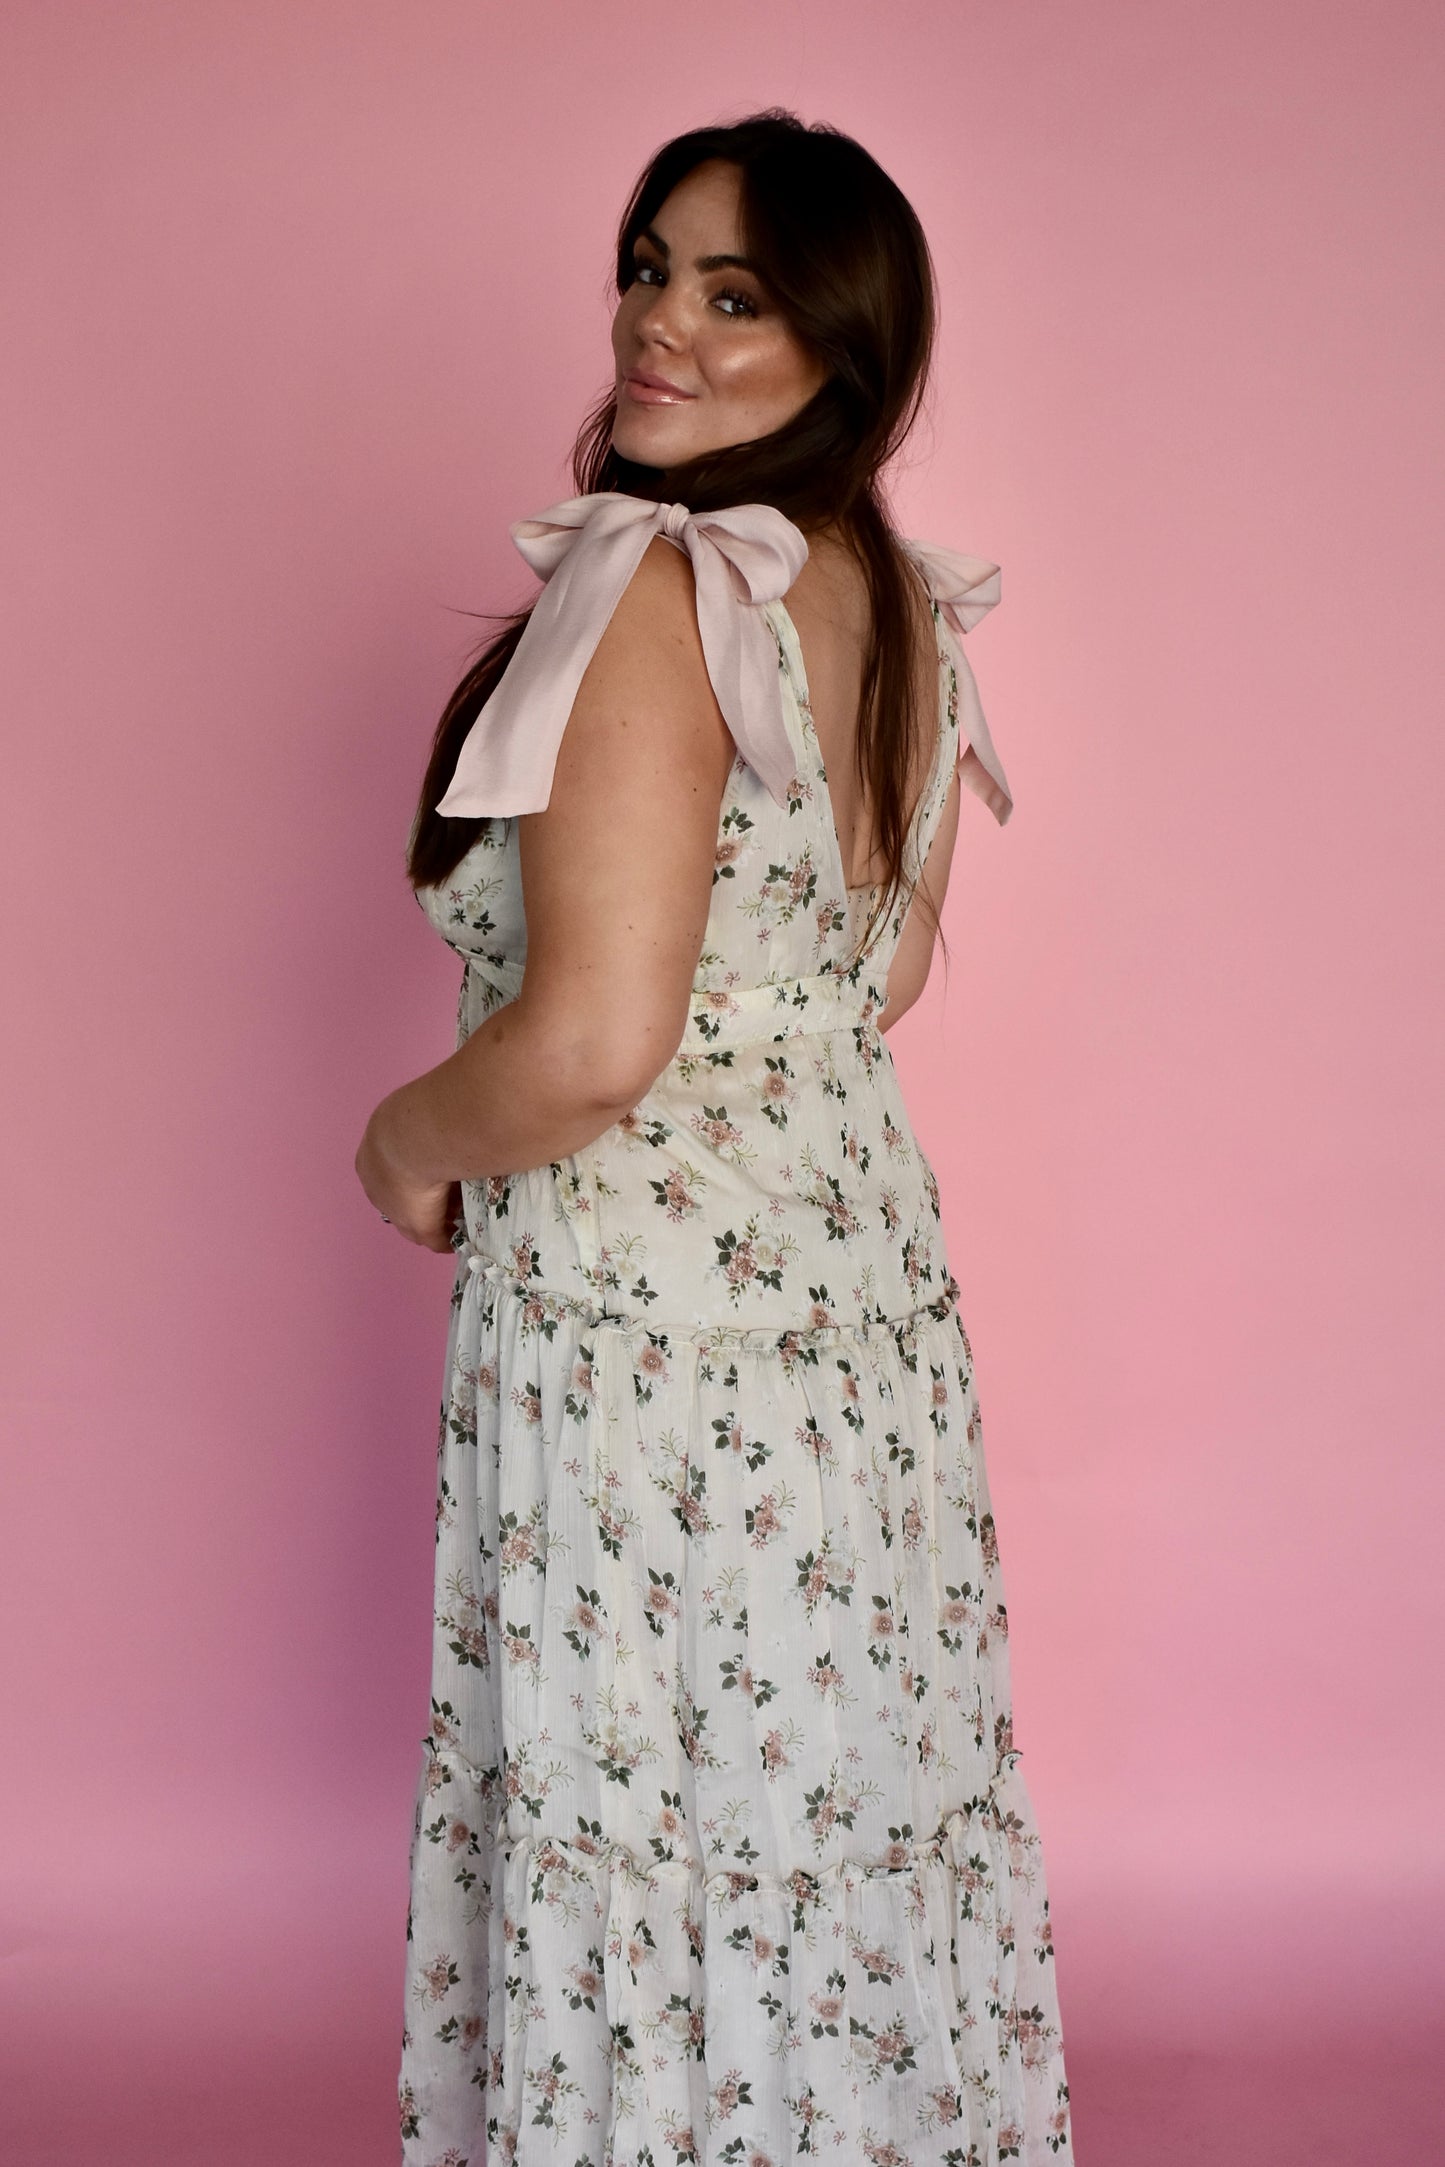 CREAM AND PINK FLORAL DRESS